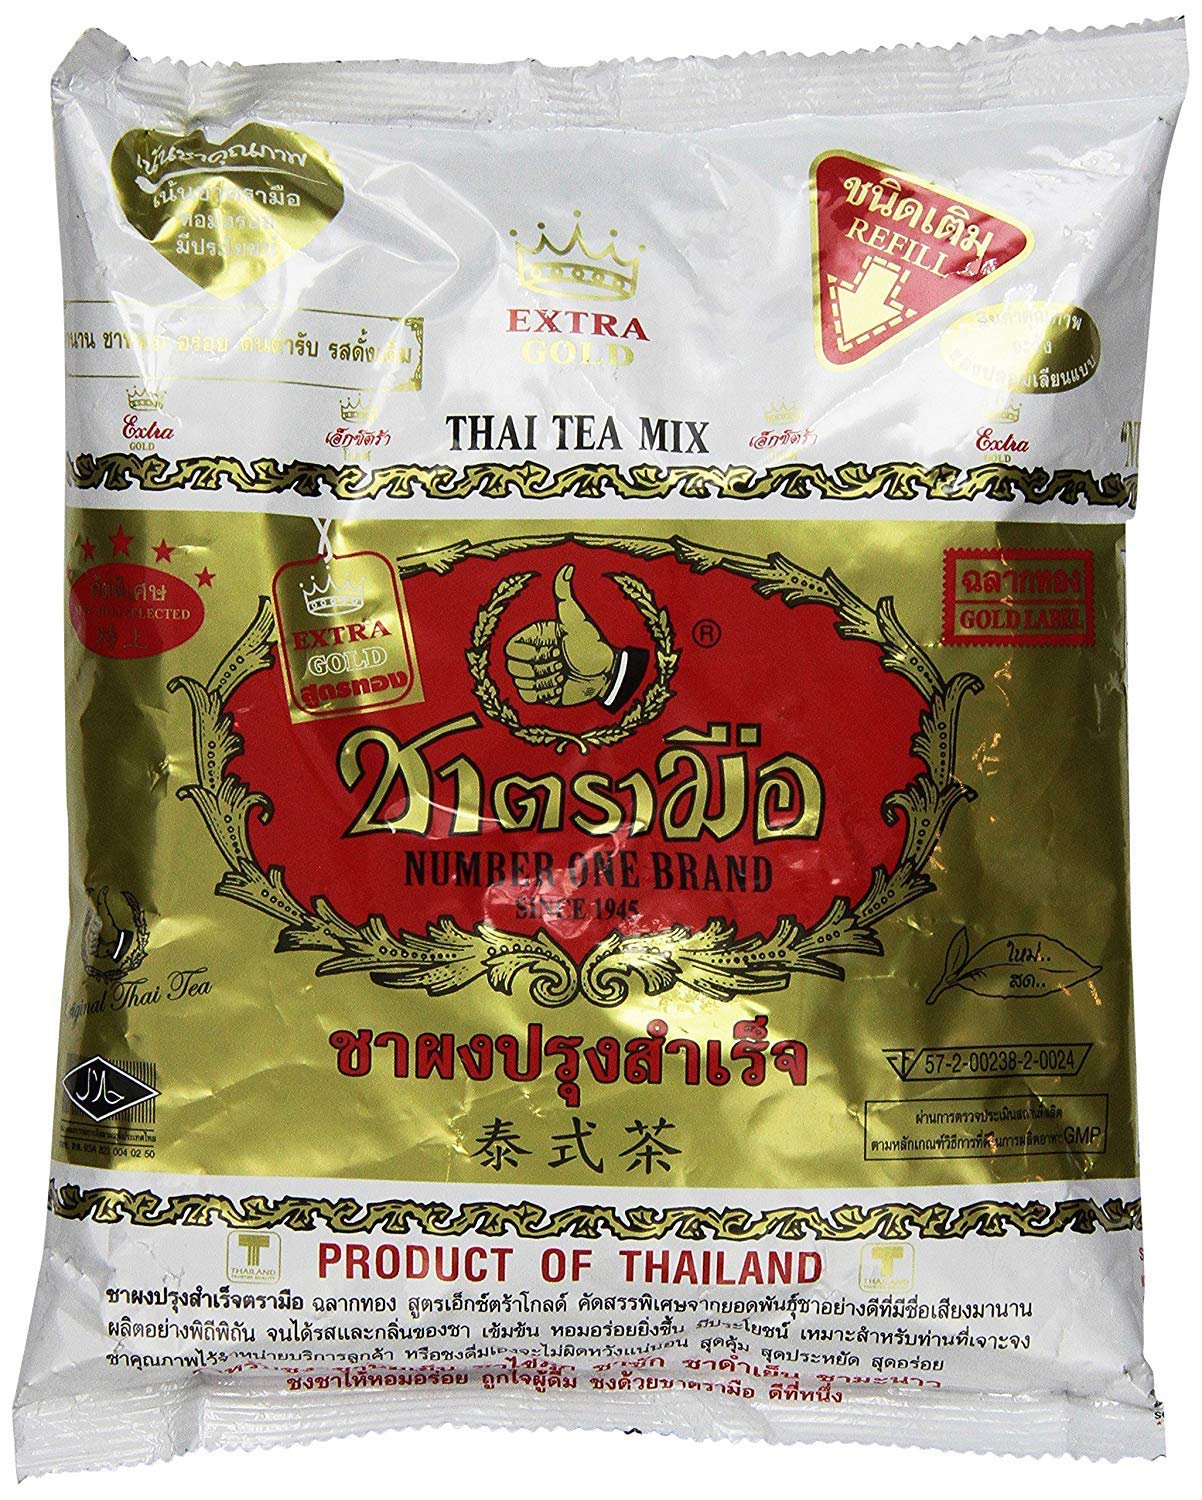 Number-One Brand Premium Thai Iced Tea Extra Gold 400g (14 Ounce),